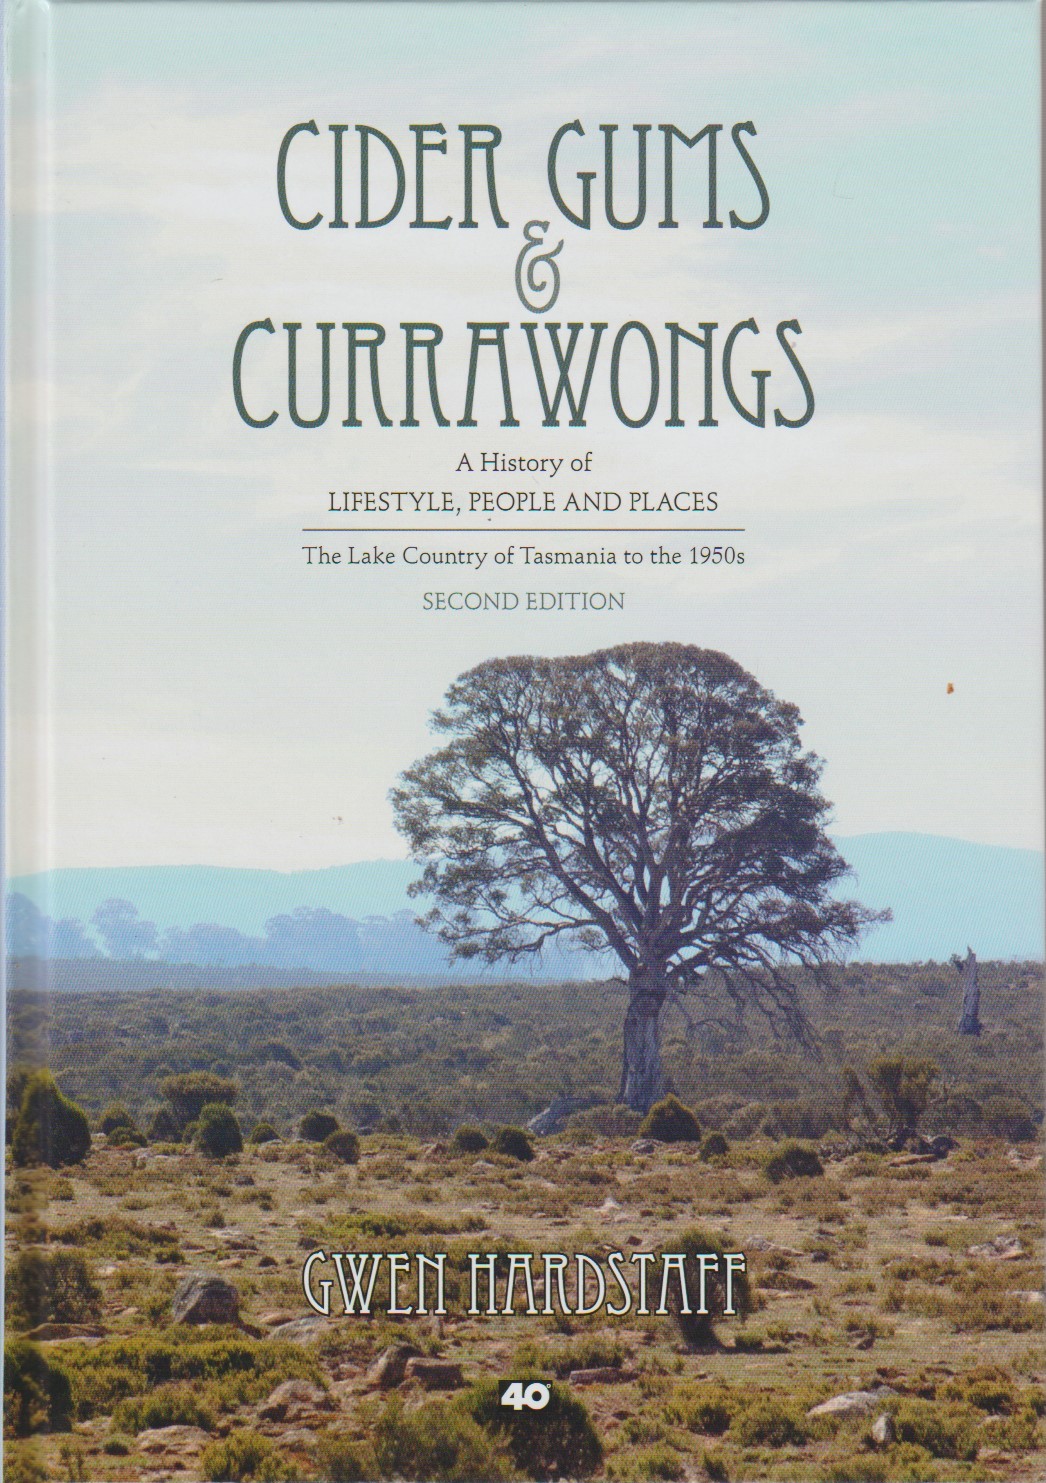 Cider Gums & Currawongs  - the Lake Country of Tasmania to the 1950s